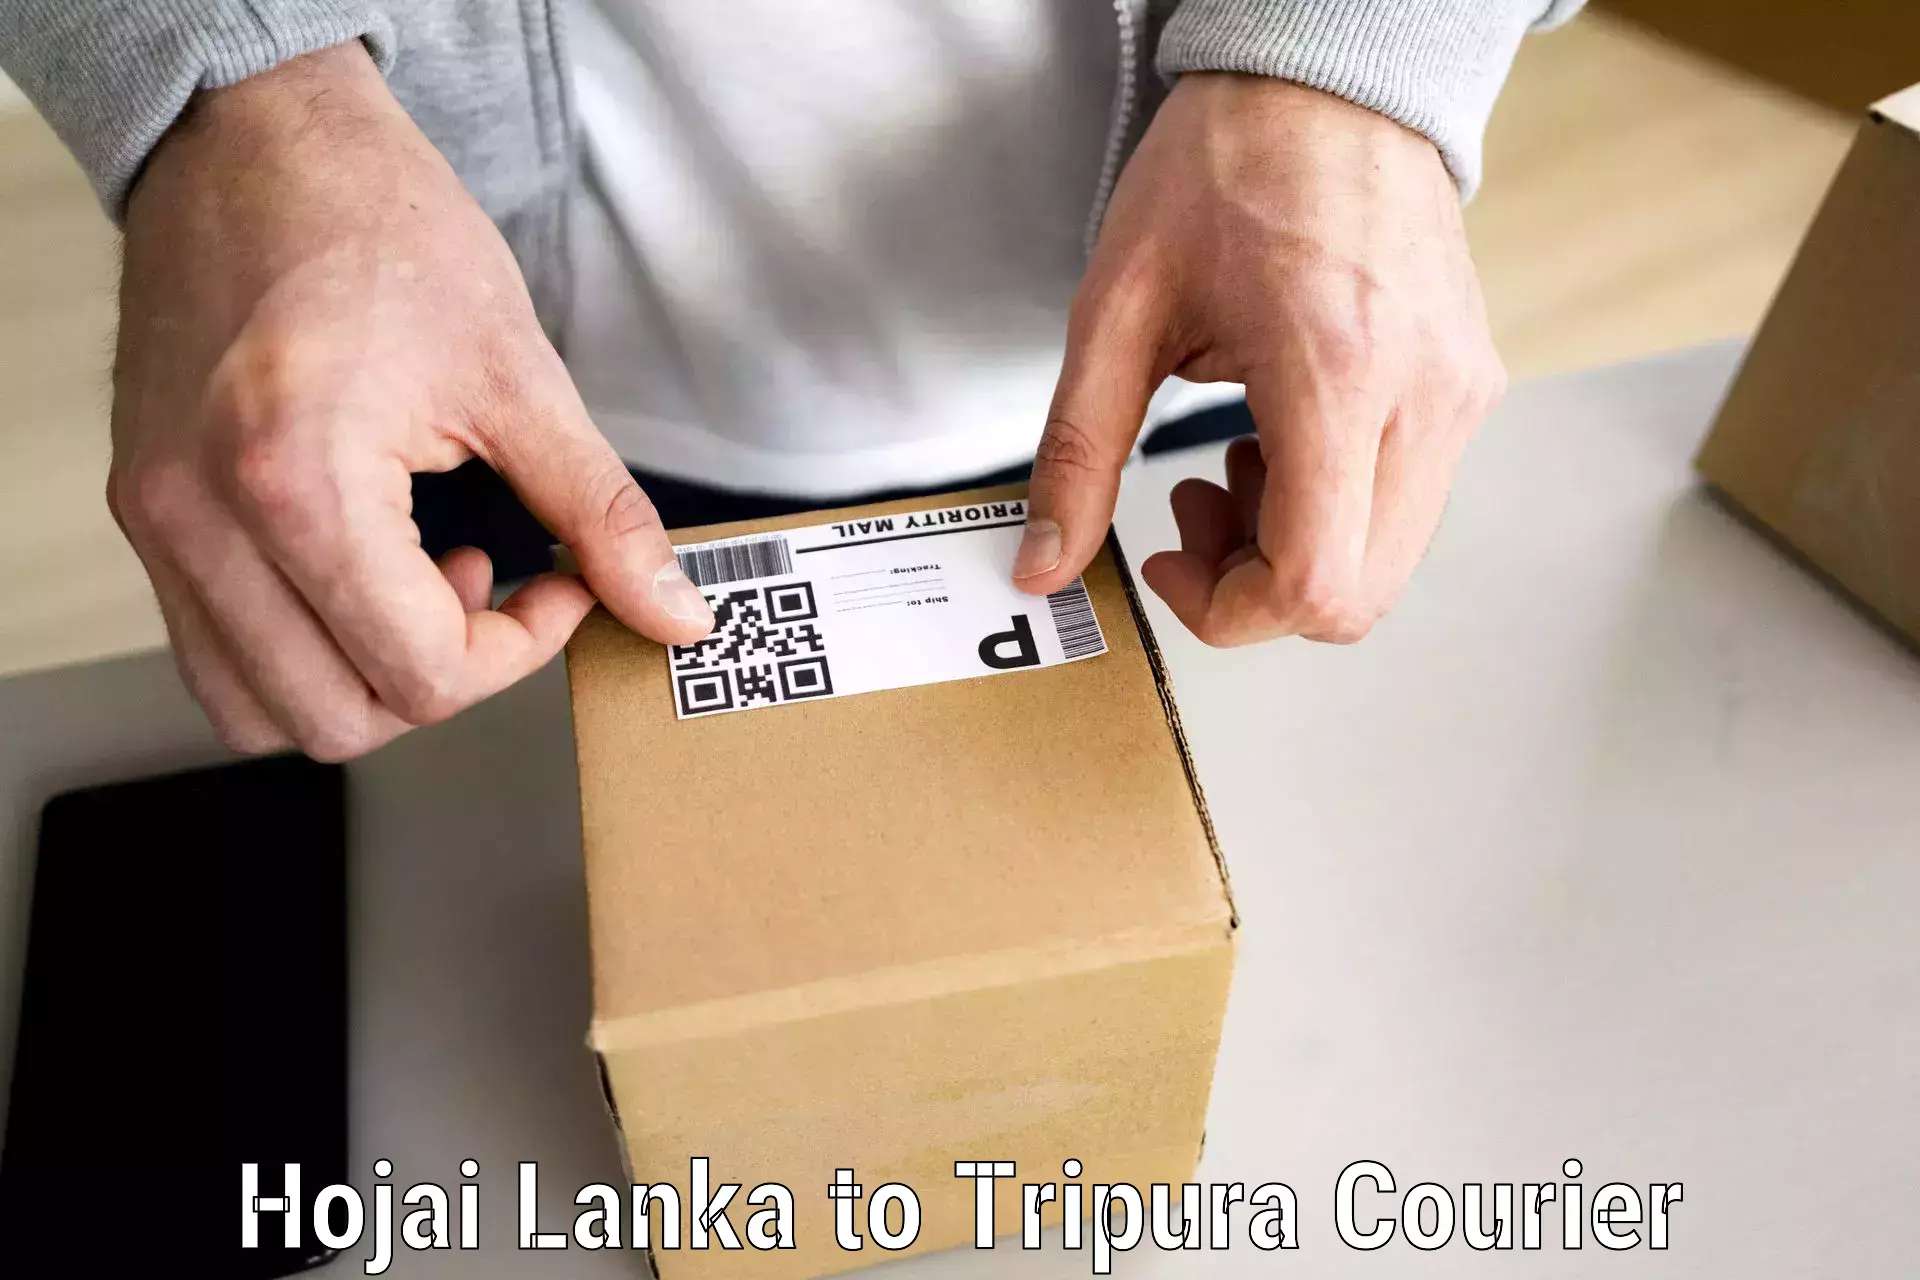 Professional movers and packers in Hojai Lanka to Tripura